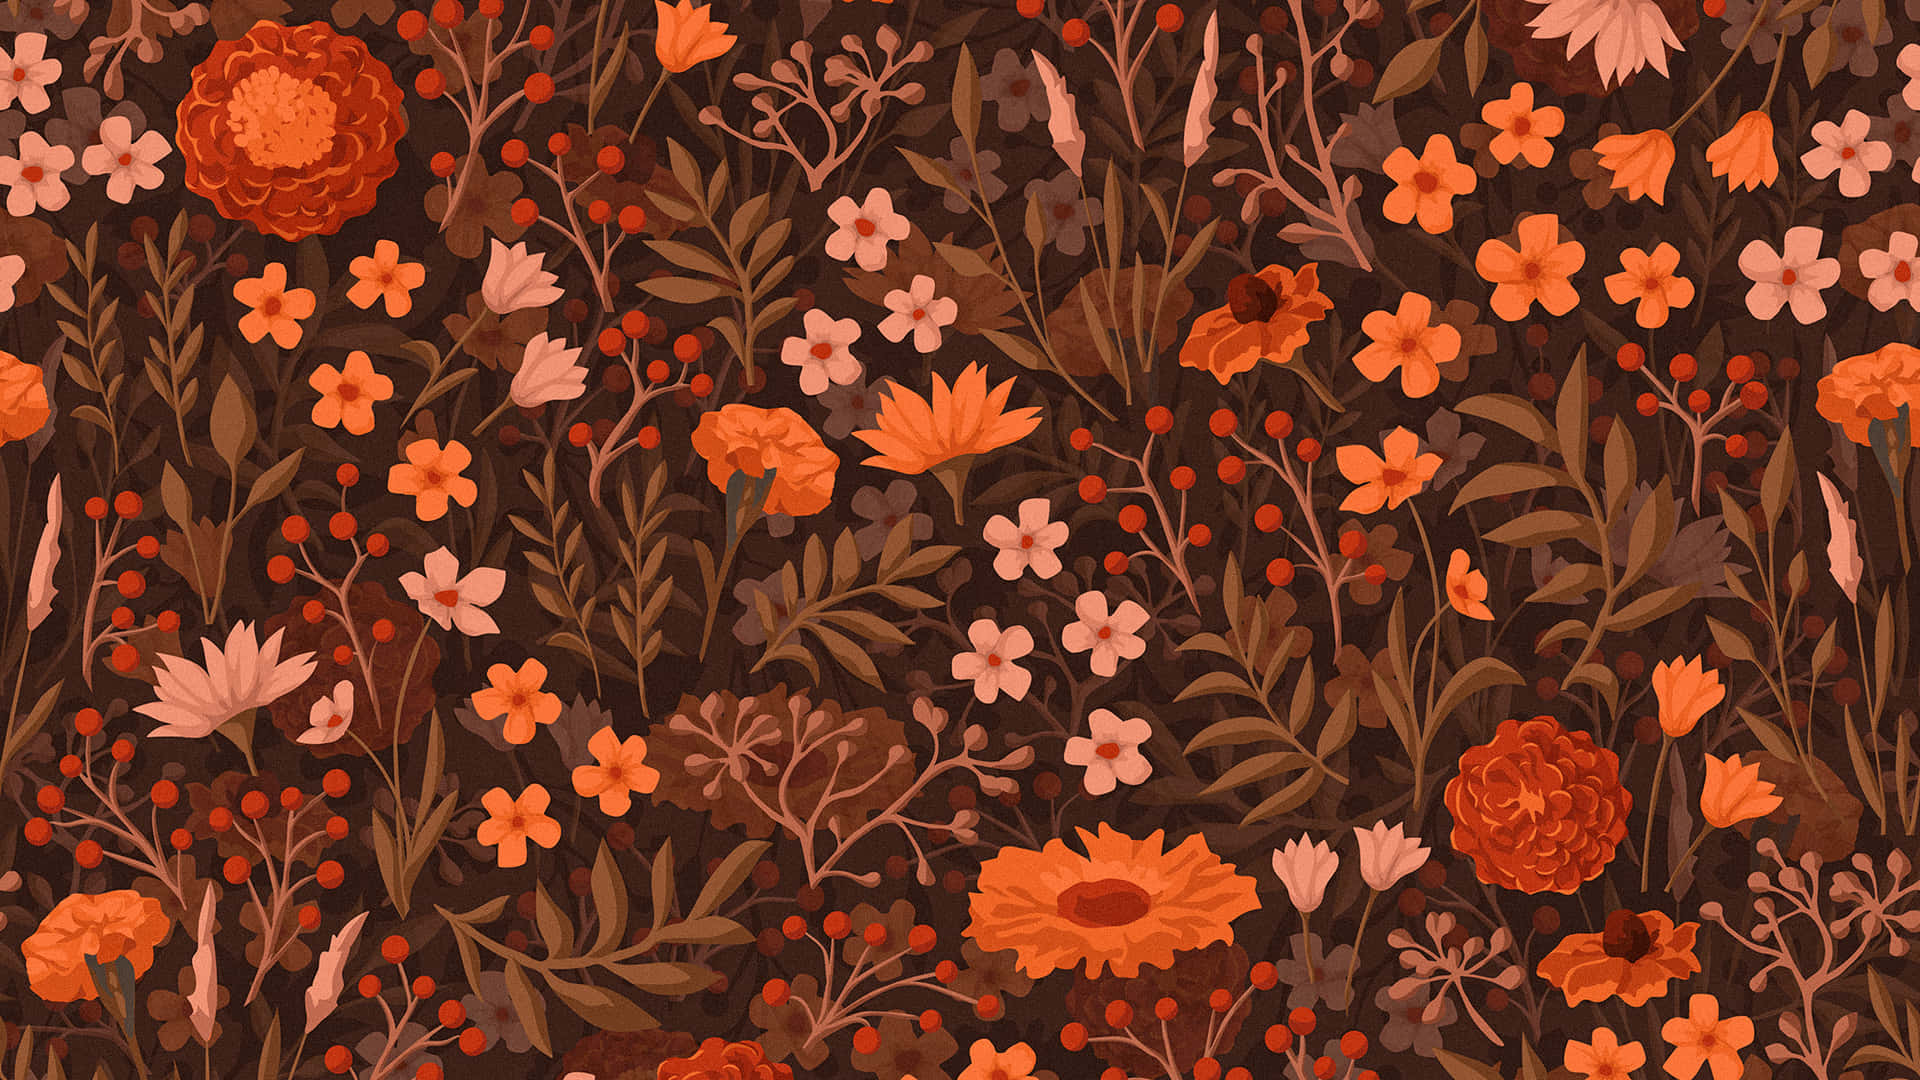 A Floral Pattern With Orange Flowers And Brown Leaves Wallpaper